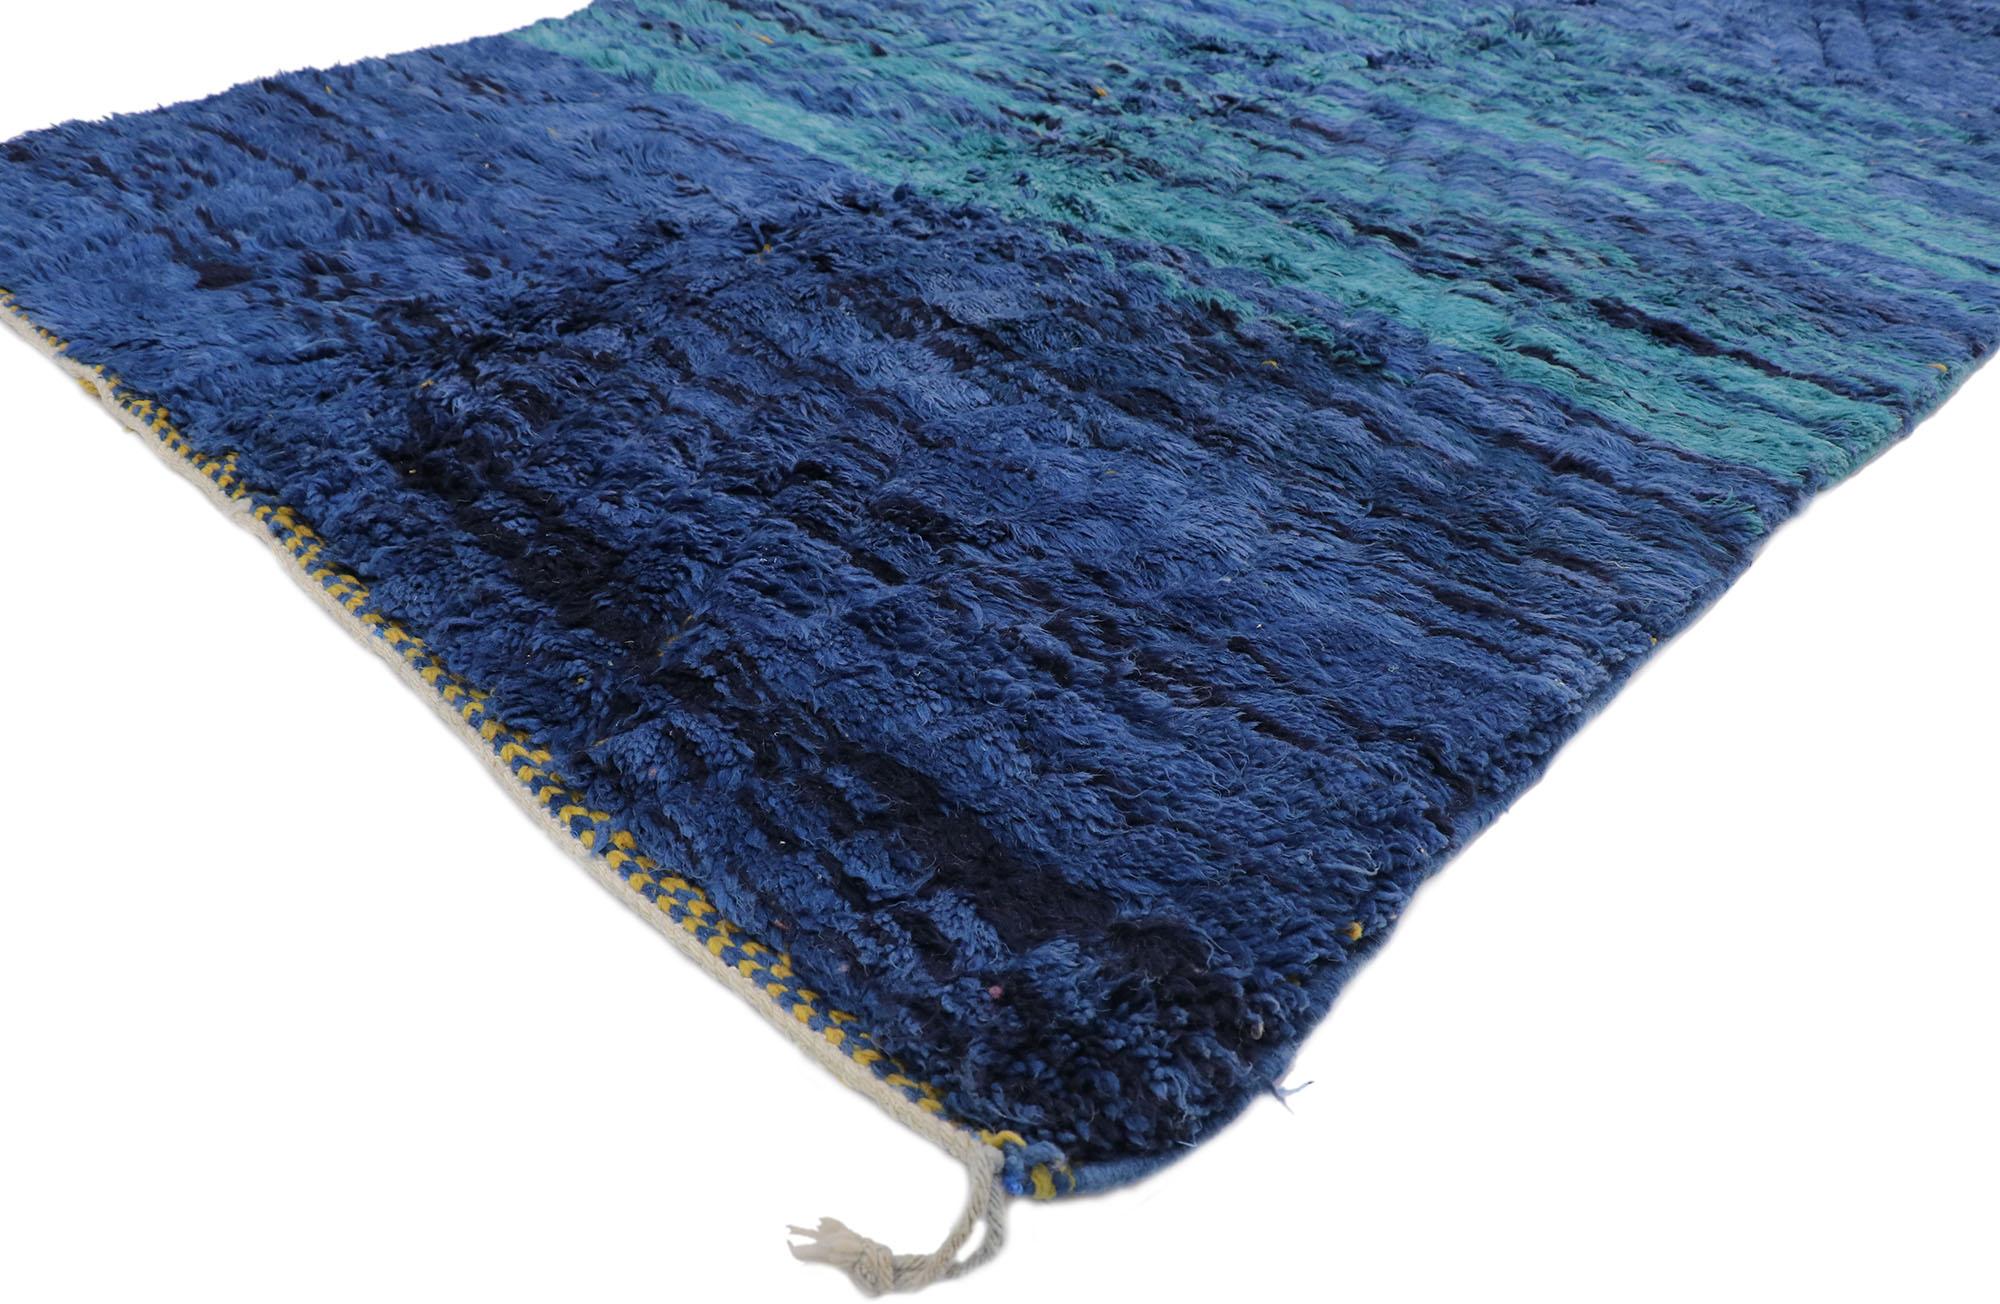 21129 New Blue Berber Moroccan Rug, 04'05 x 08'011. 
Modern Boho Chic style meets Abstract Expressionism in this hand knotted wool Berber Moroccan rug. The hand-carved design and bold blue hues woven into this piece work together creating a truly